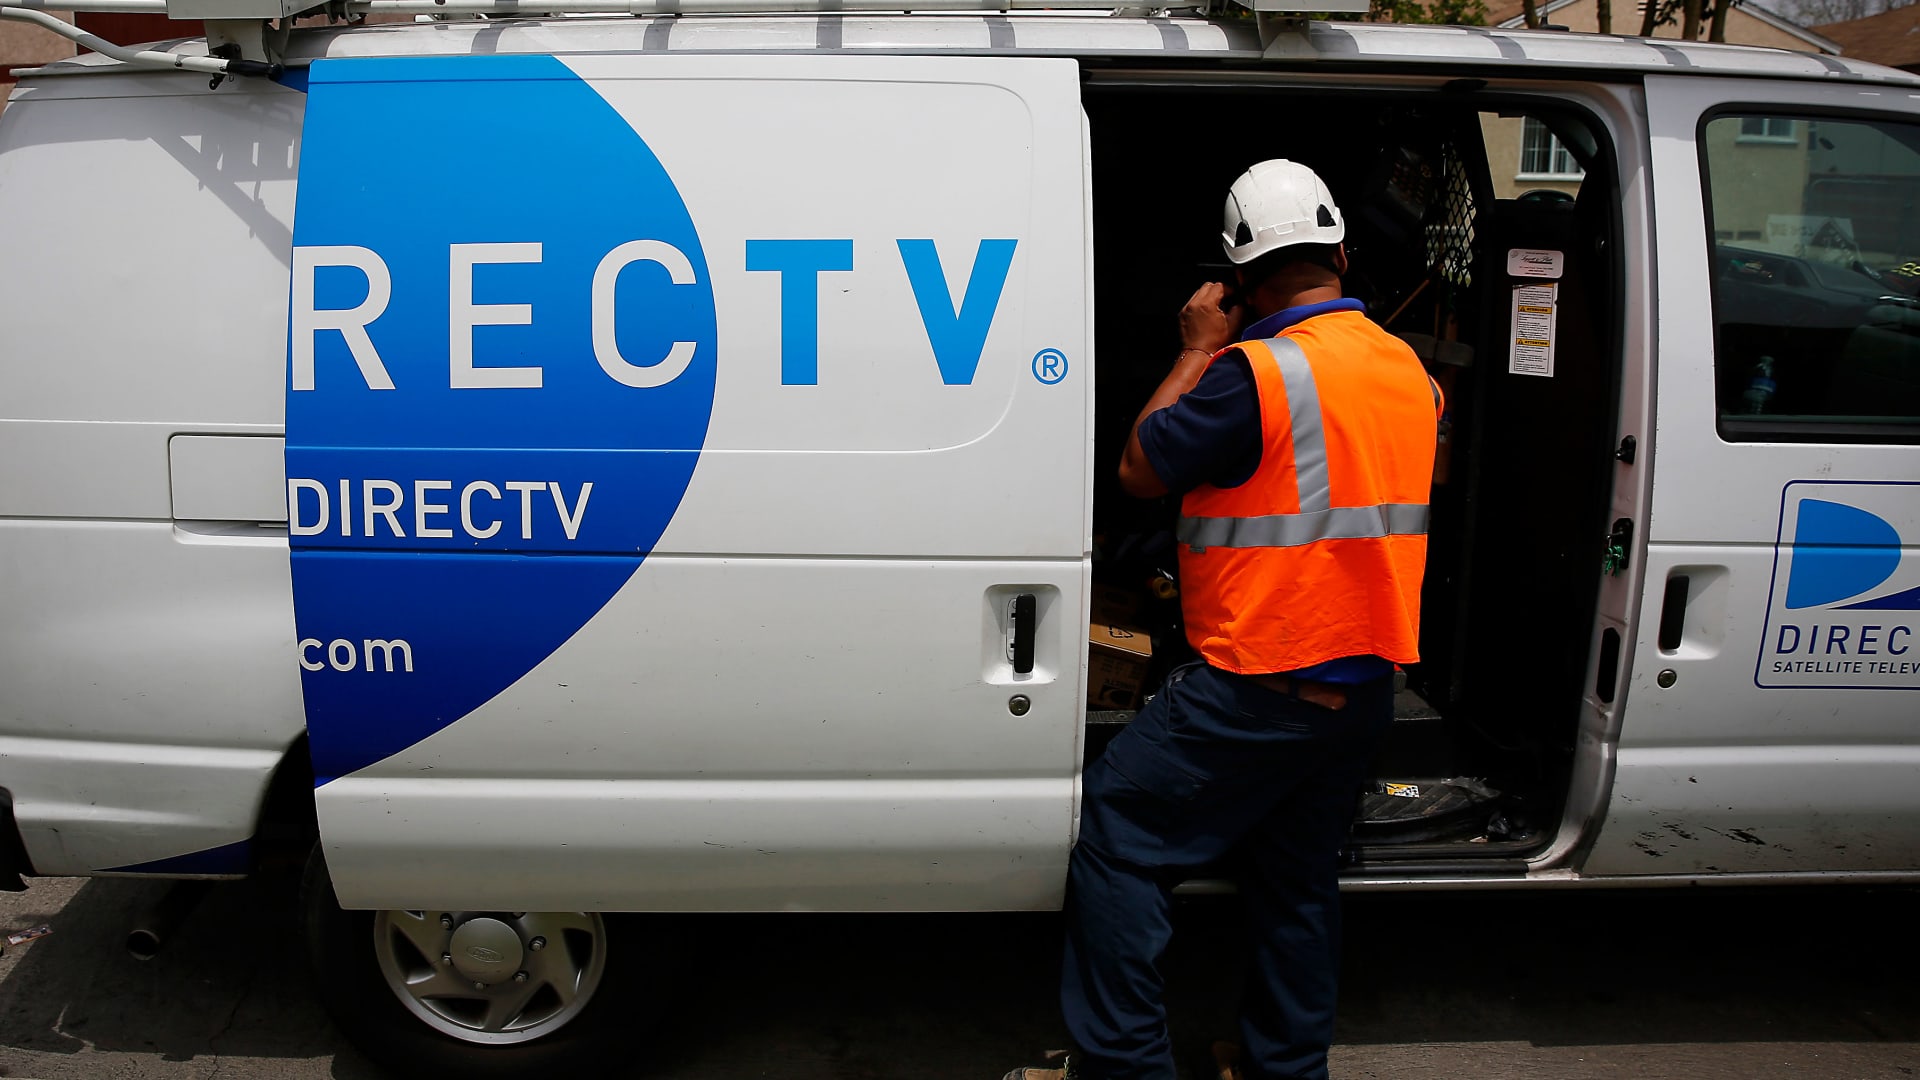 DirecTV lays off hundreds of managers as cord cutting accelerates